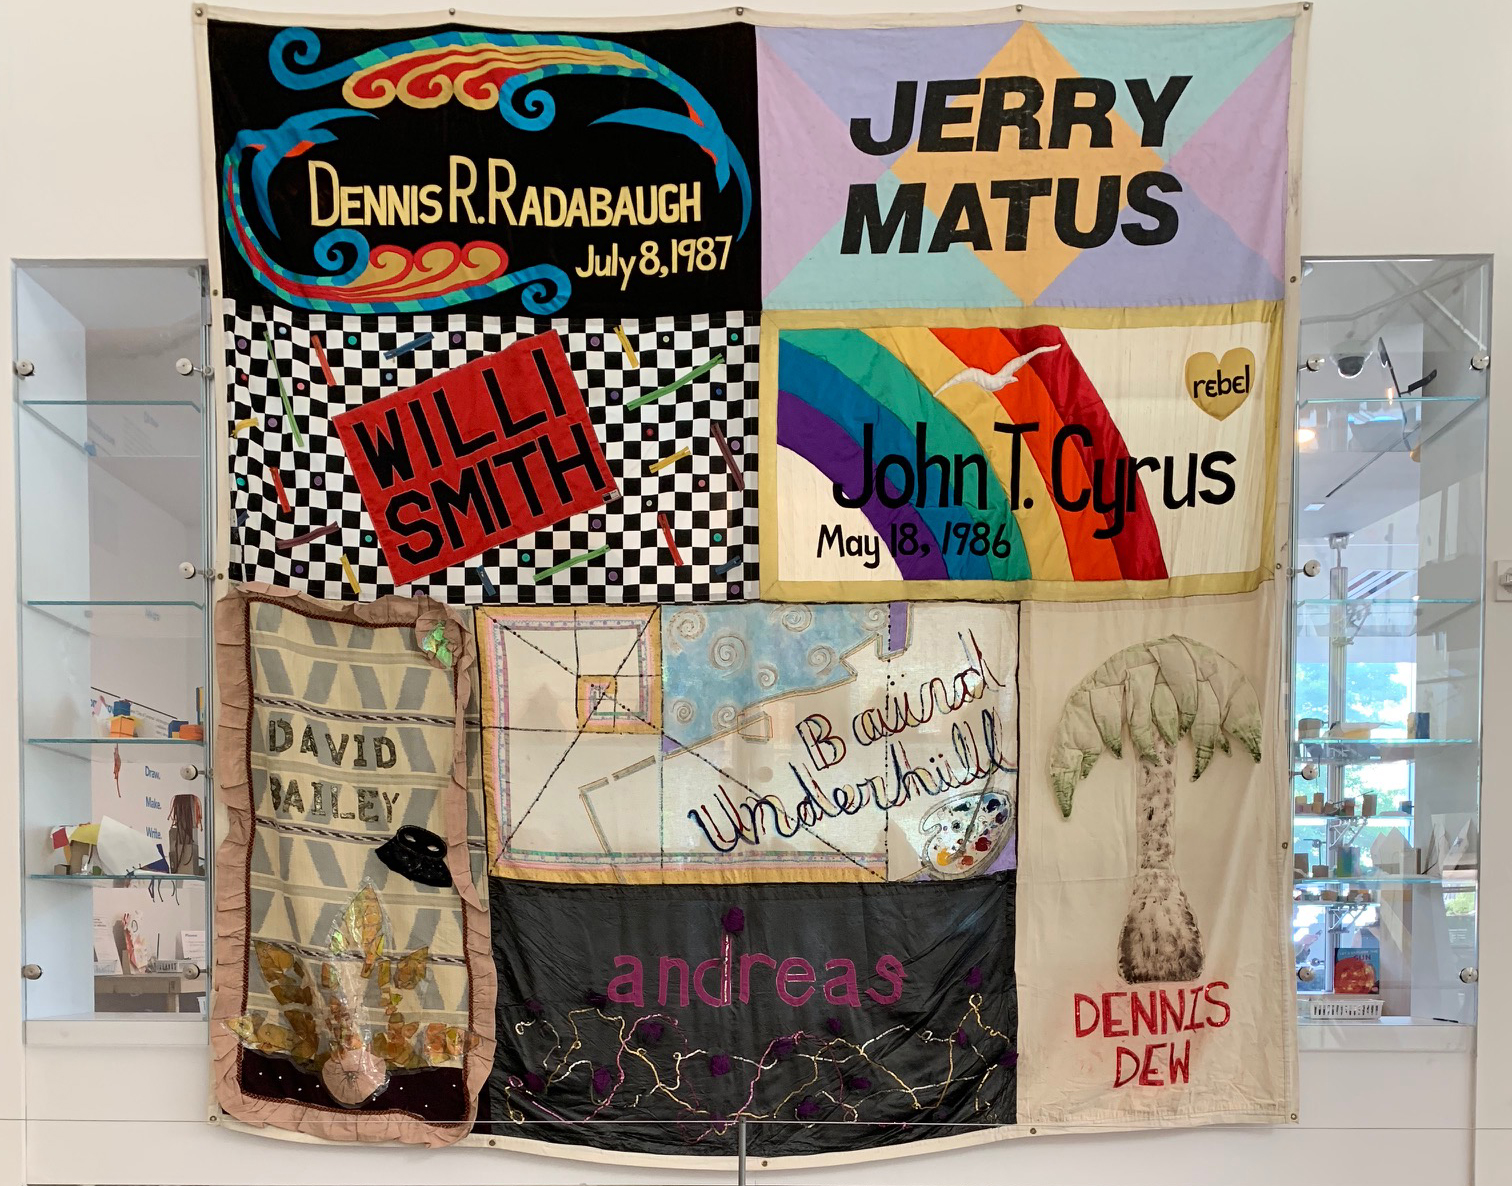 A large quilt hangs from ceiling of an exhibition wall. The square quilt is made up of eight rectangular patches. Each patch is made up with different patterns, colors, and motifs and has the name of a community member lost to AIDs in large font.